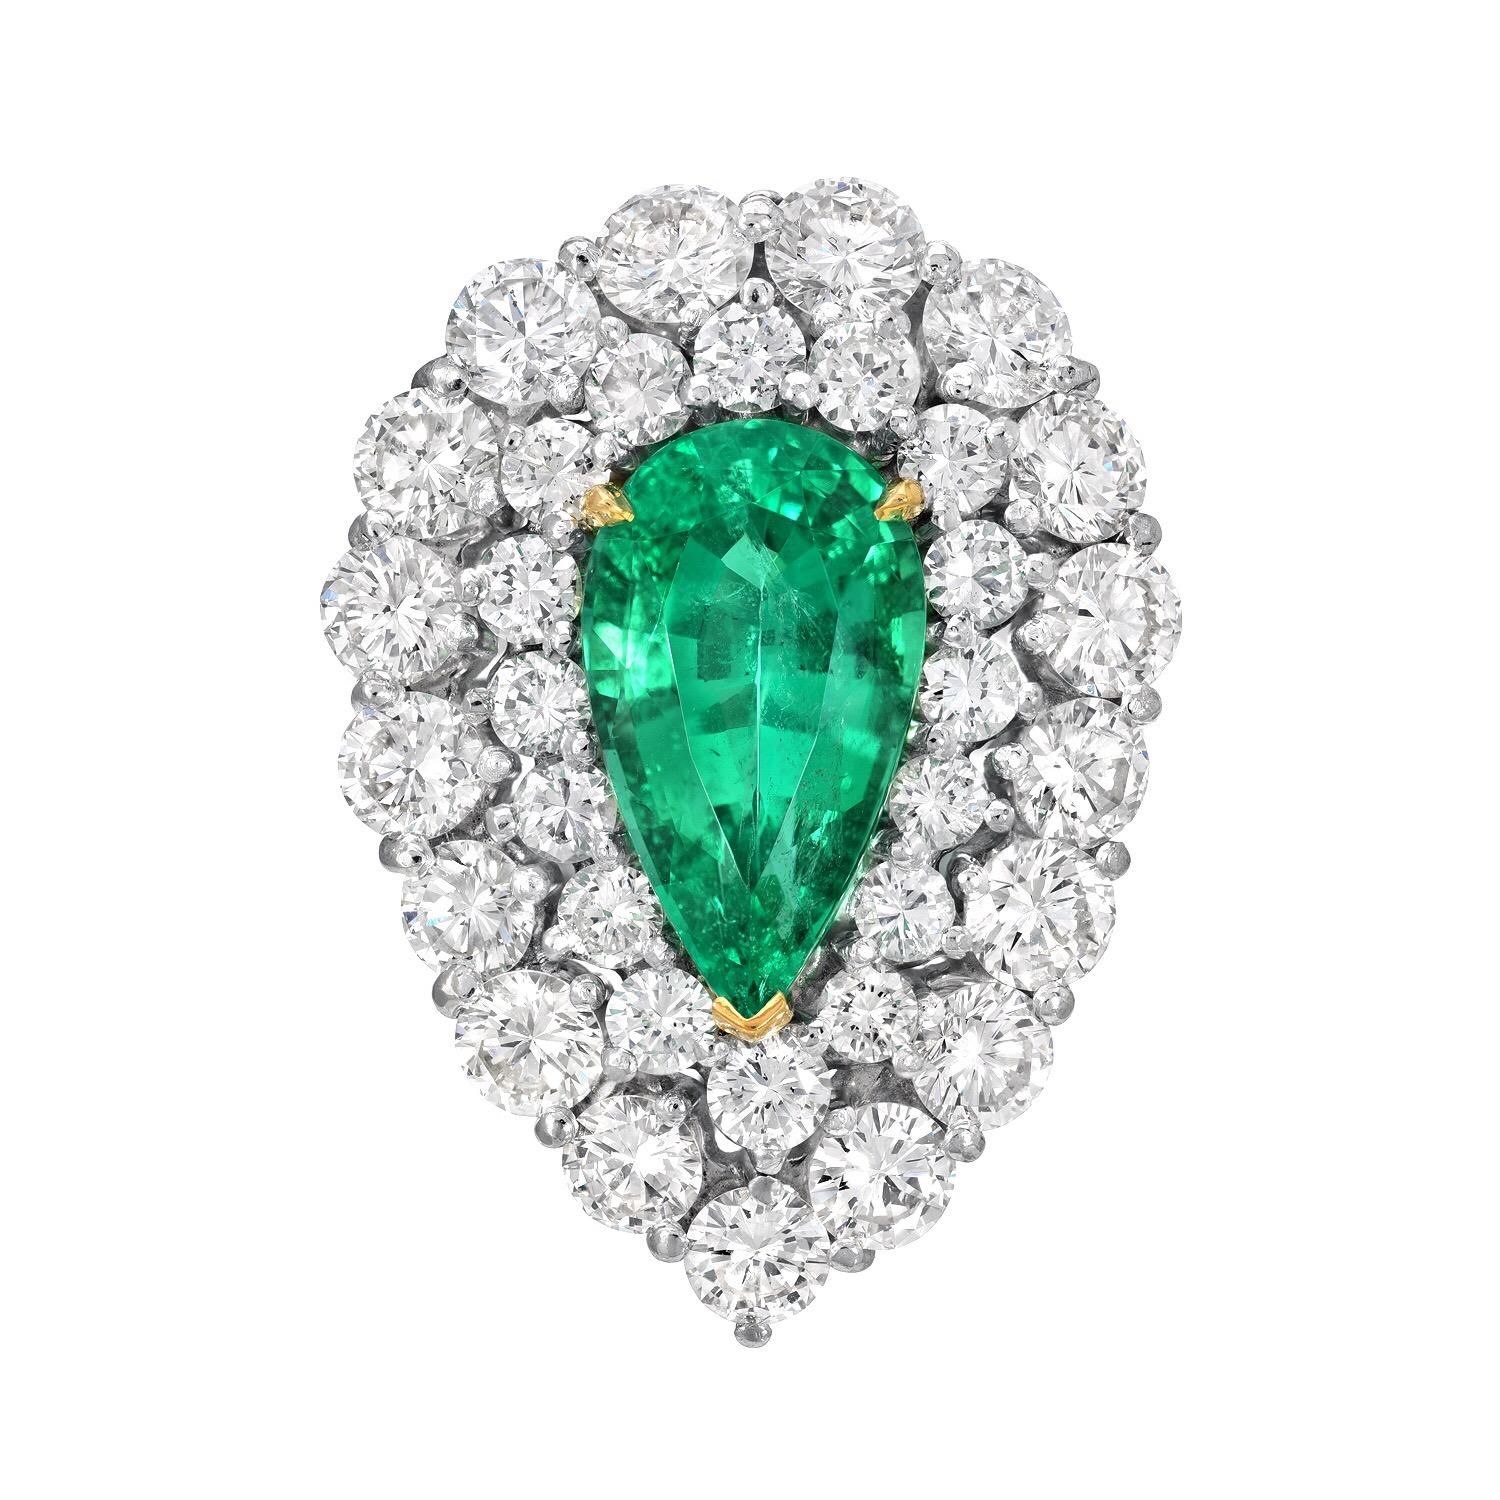 Colombian Emerald ring featuring a 5.31 carat pear shape, untreated, natural Emerald, nestled in a statement vintage platinum ring with diamonds.
AGL gem certificate is attached in the image scroll for your convenience.
Size 9.25. Resizing is